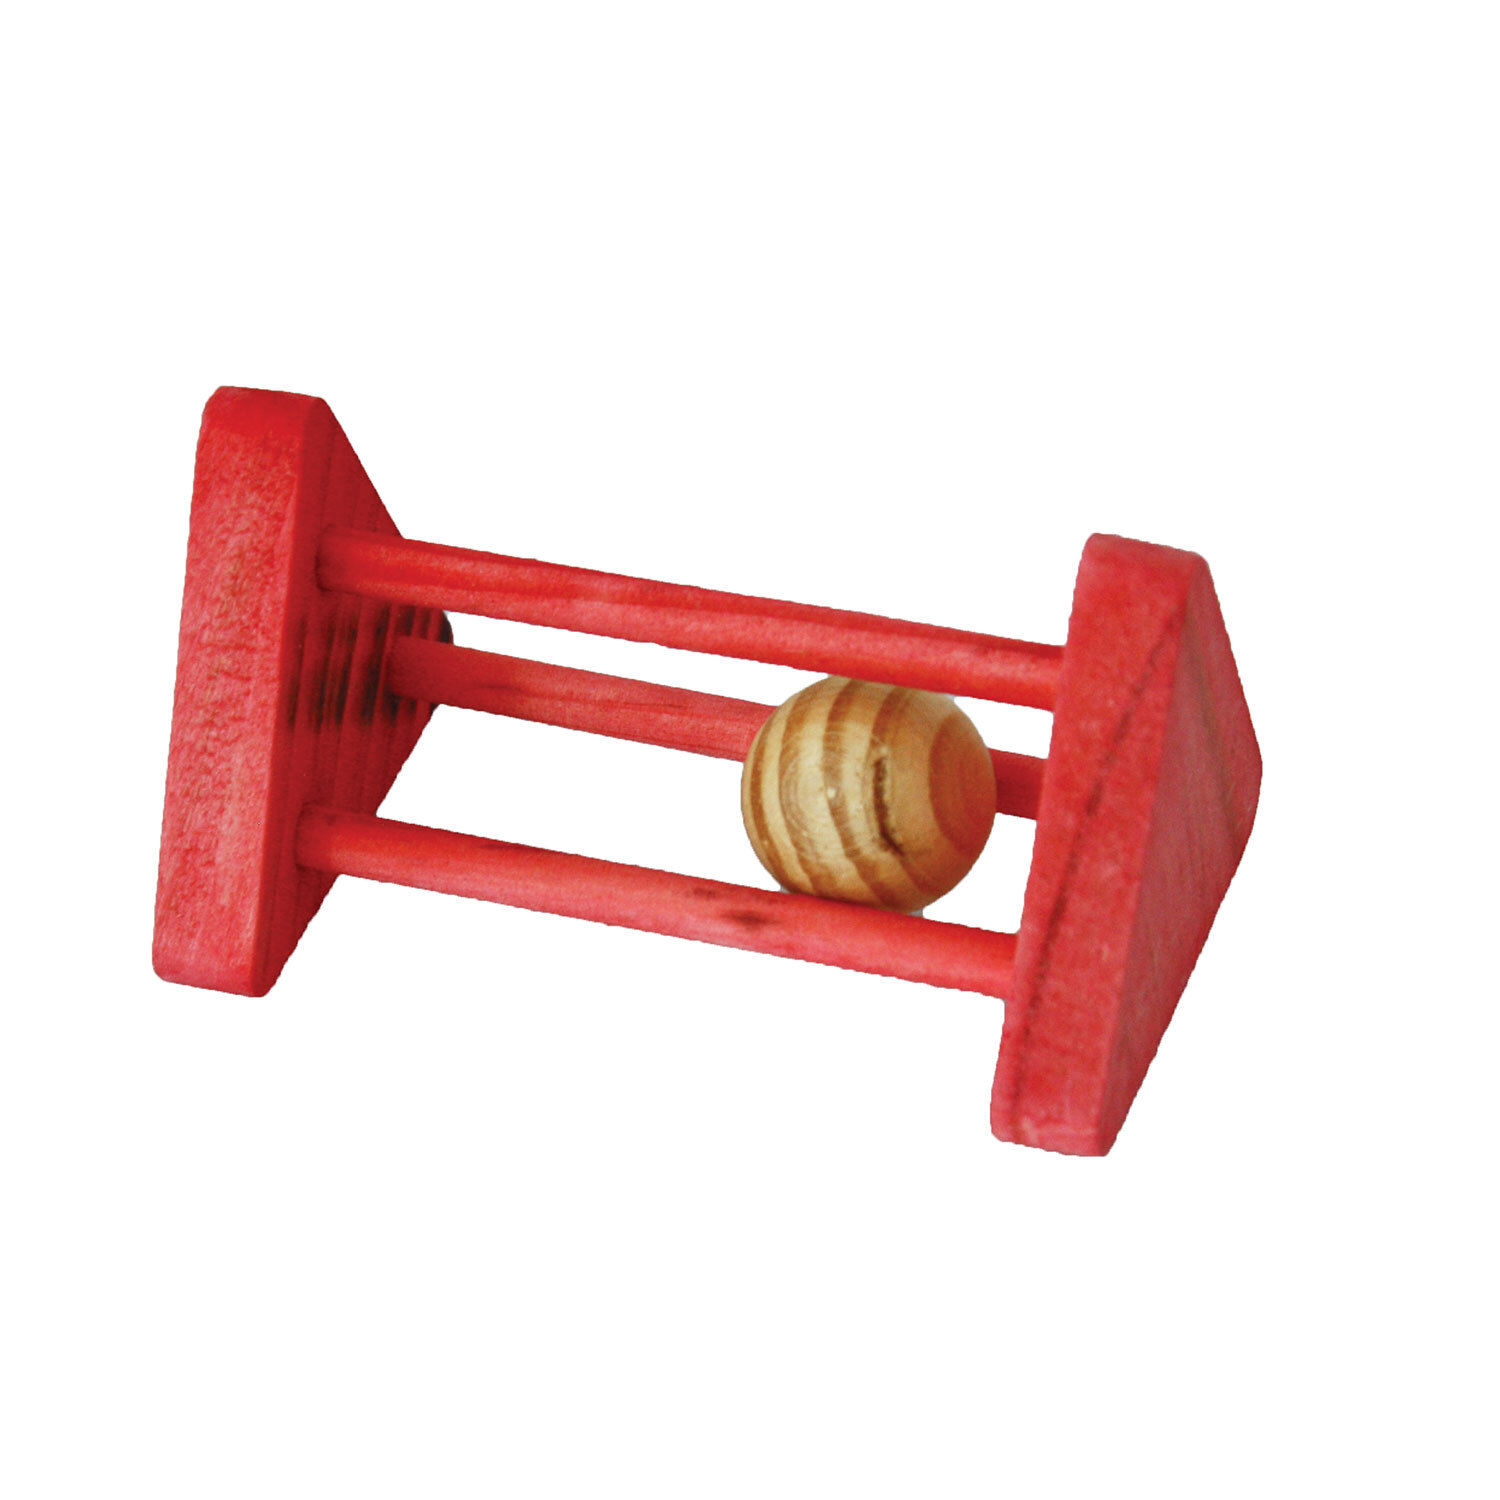 Wooden Rattler Toy - Red Image